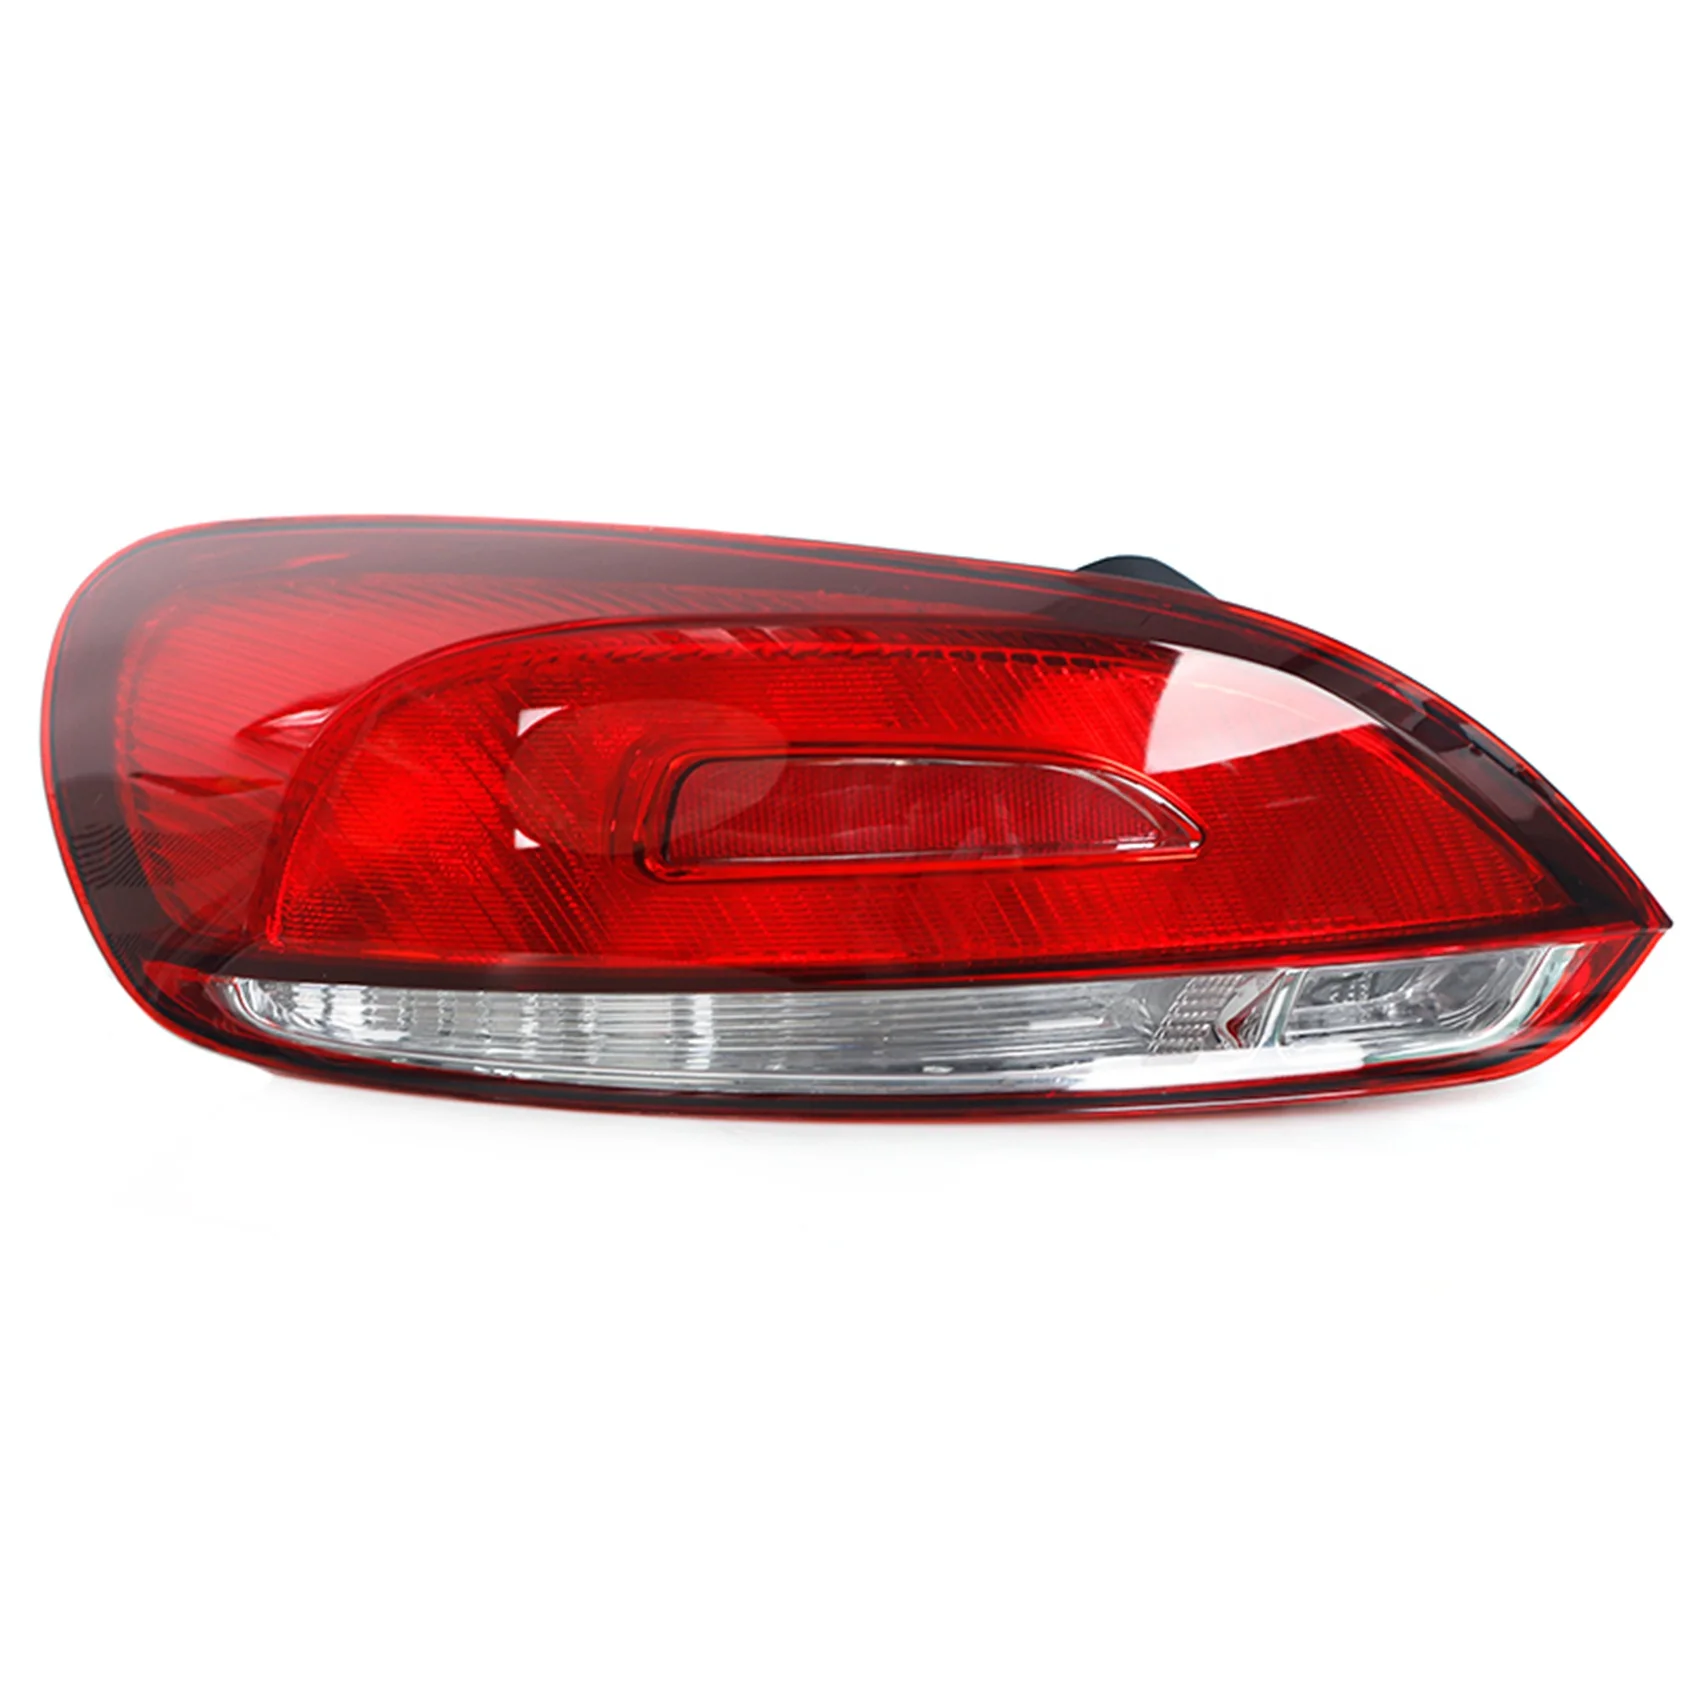 

Left Tail Light Rear Brake Lamp Without Bulb Stop Warning Lights For-VW Scirocco 2008-2014 1K8945096R 1K8945095G